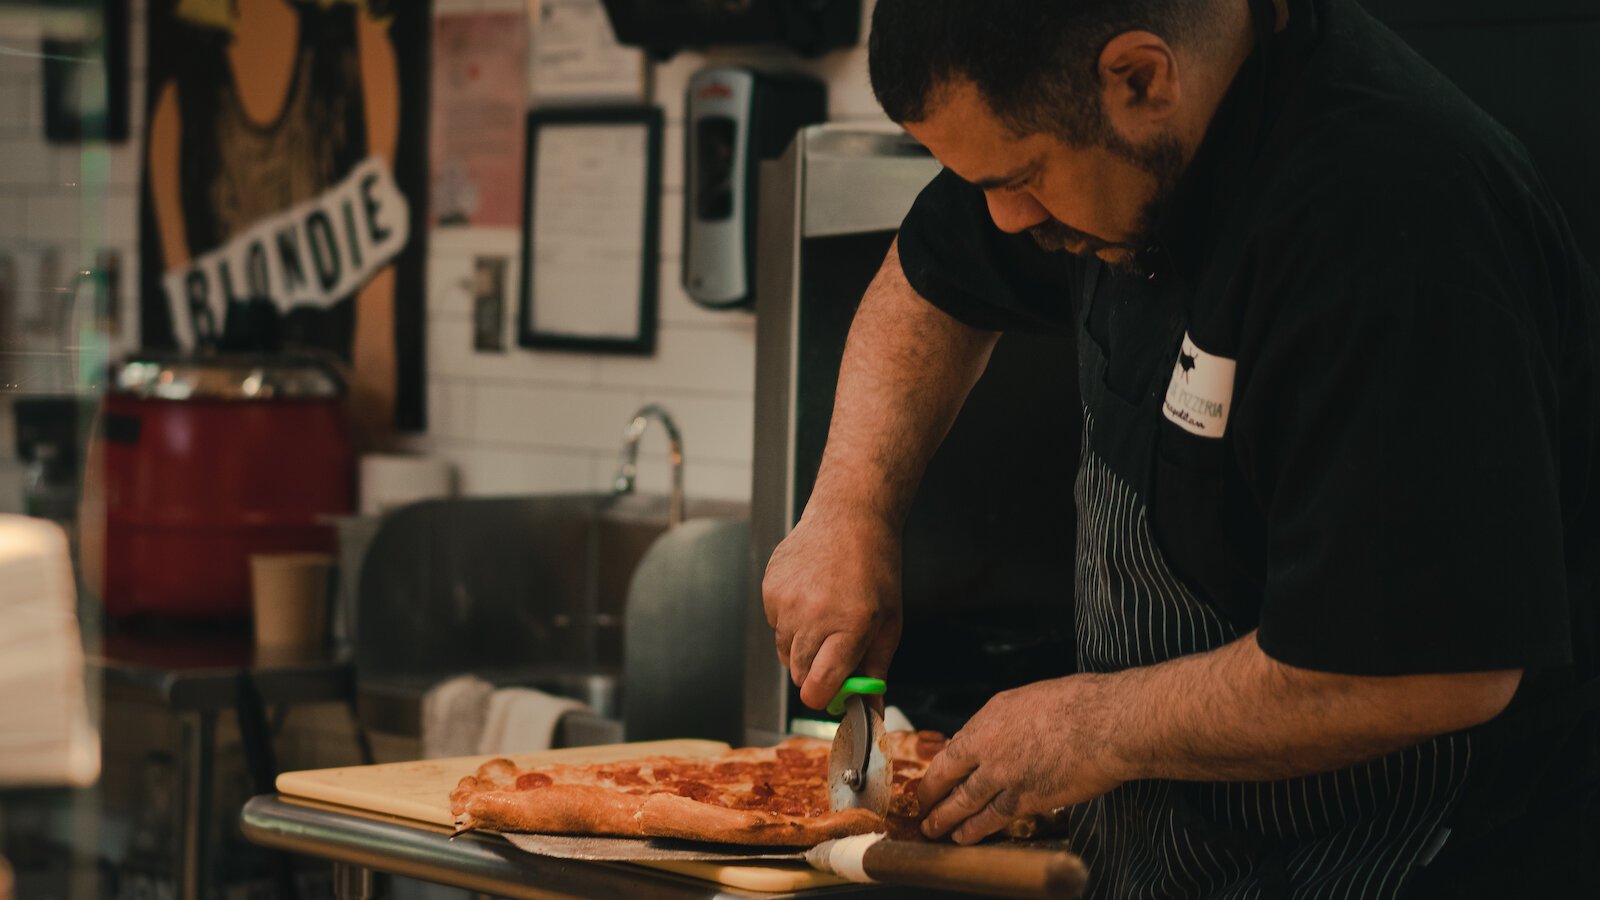 Owner of Johnny OX Pizzeria, Johnny Bojinoff, cuts a freshly made pizza.